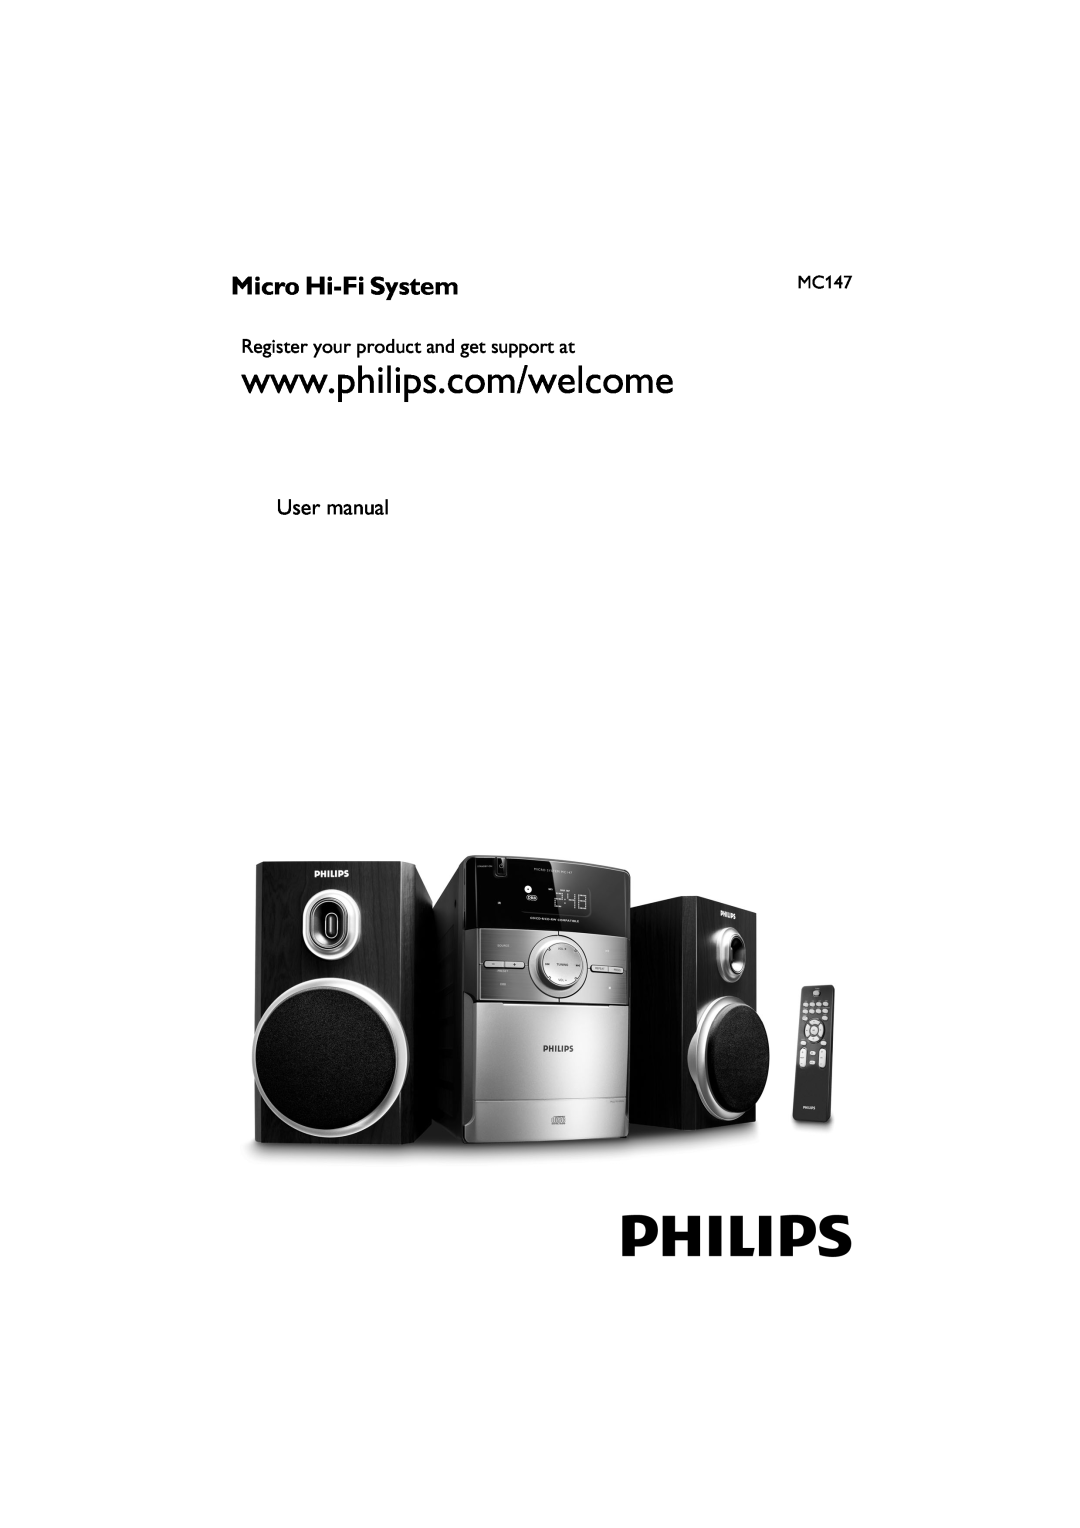 Philips MC147 user manual Micro Hi-FiSystem, Register your product and get support at 